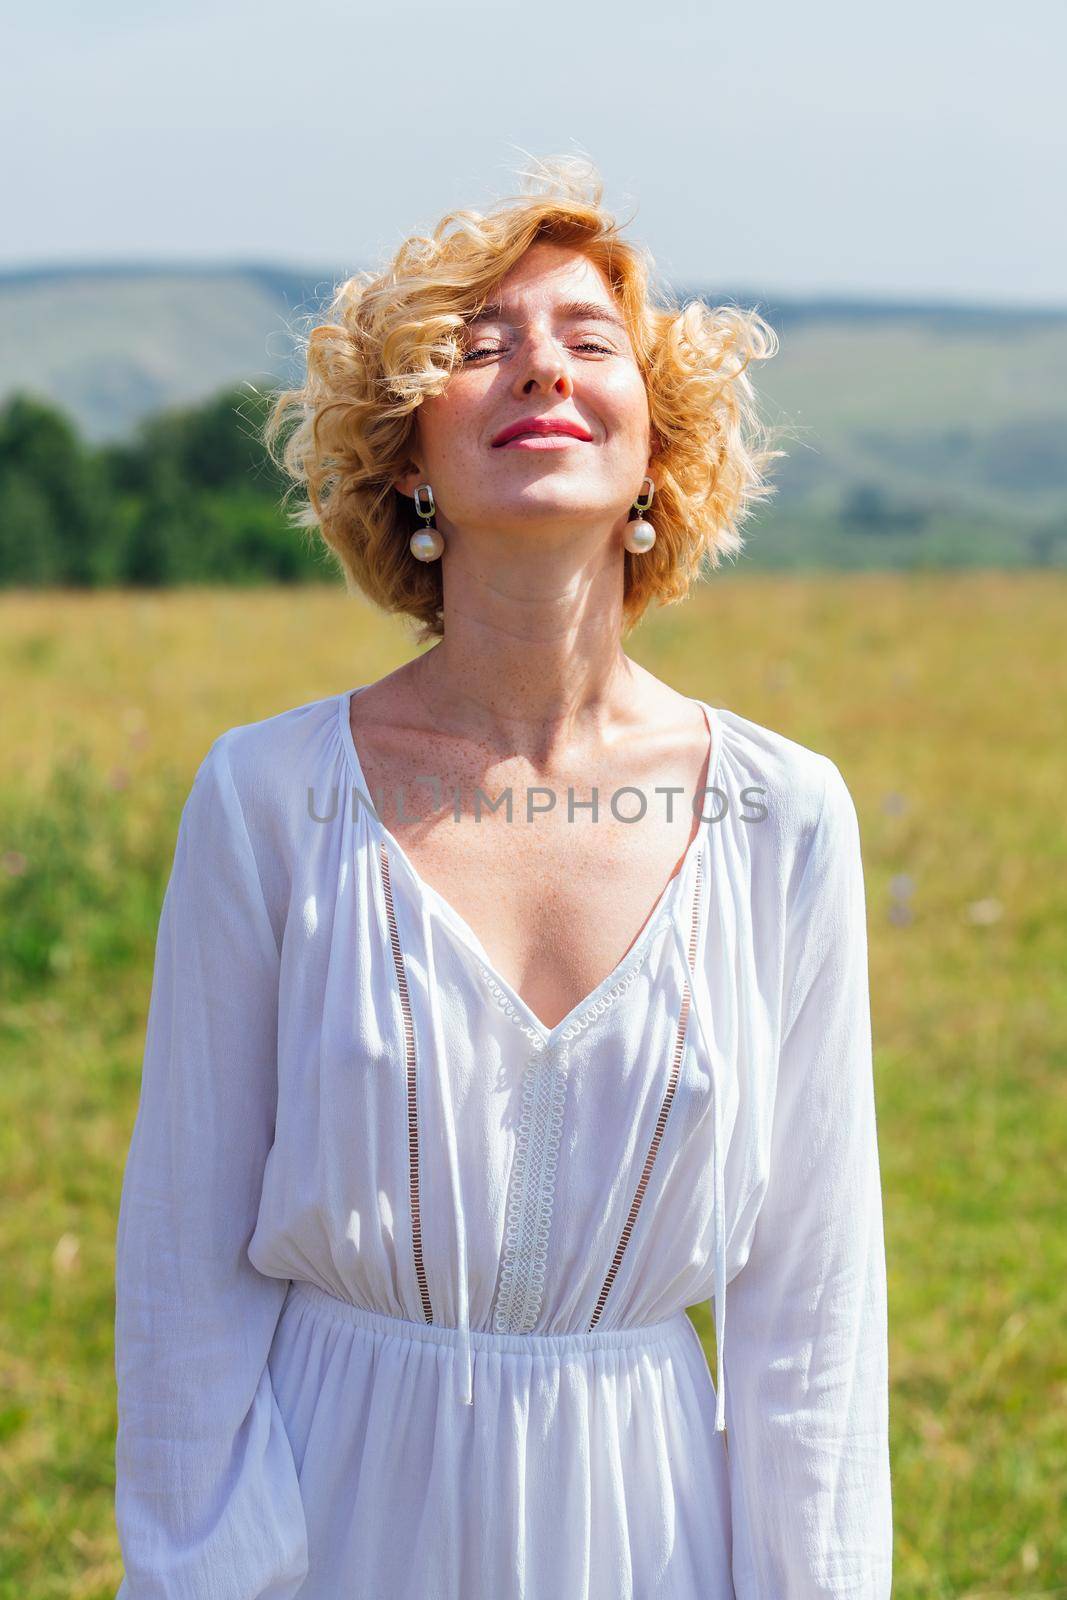 Beautiful blonde woman with short curly hair outdoors. by Smile19